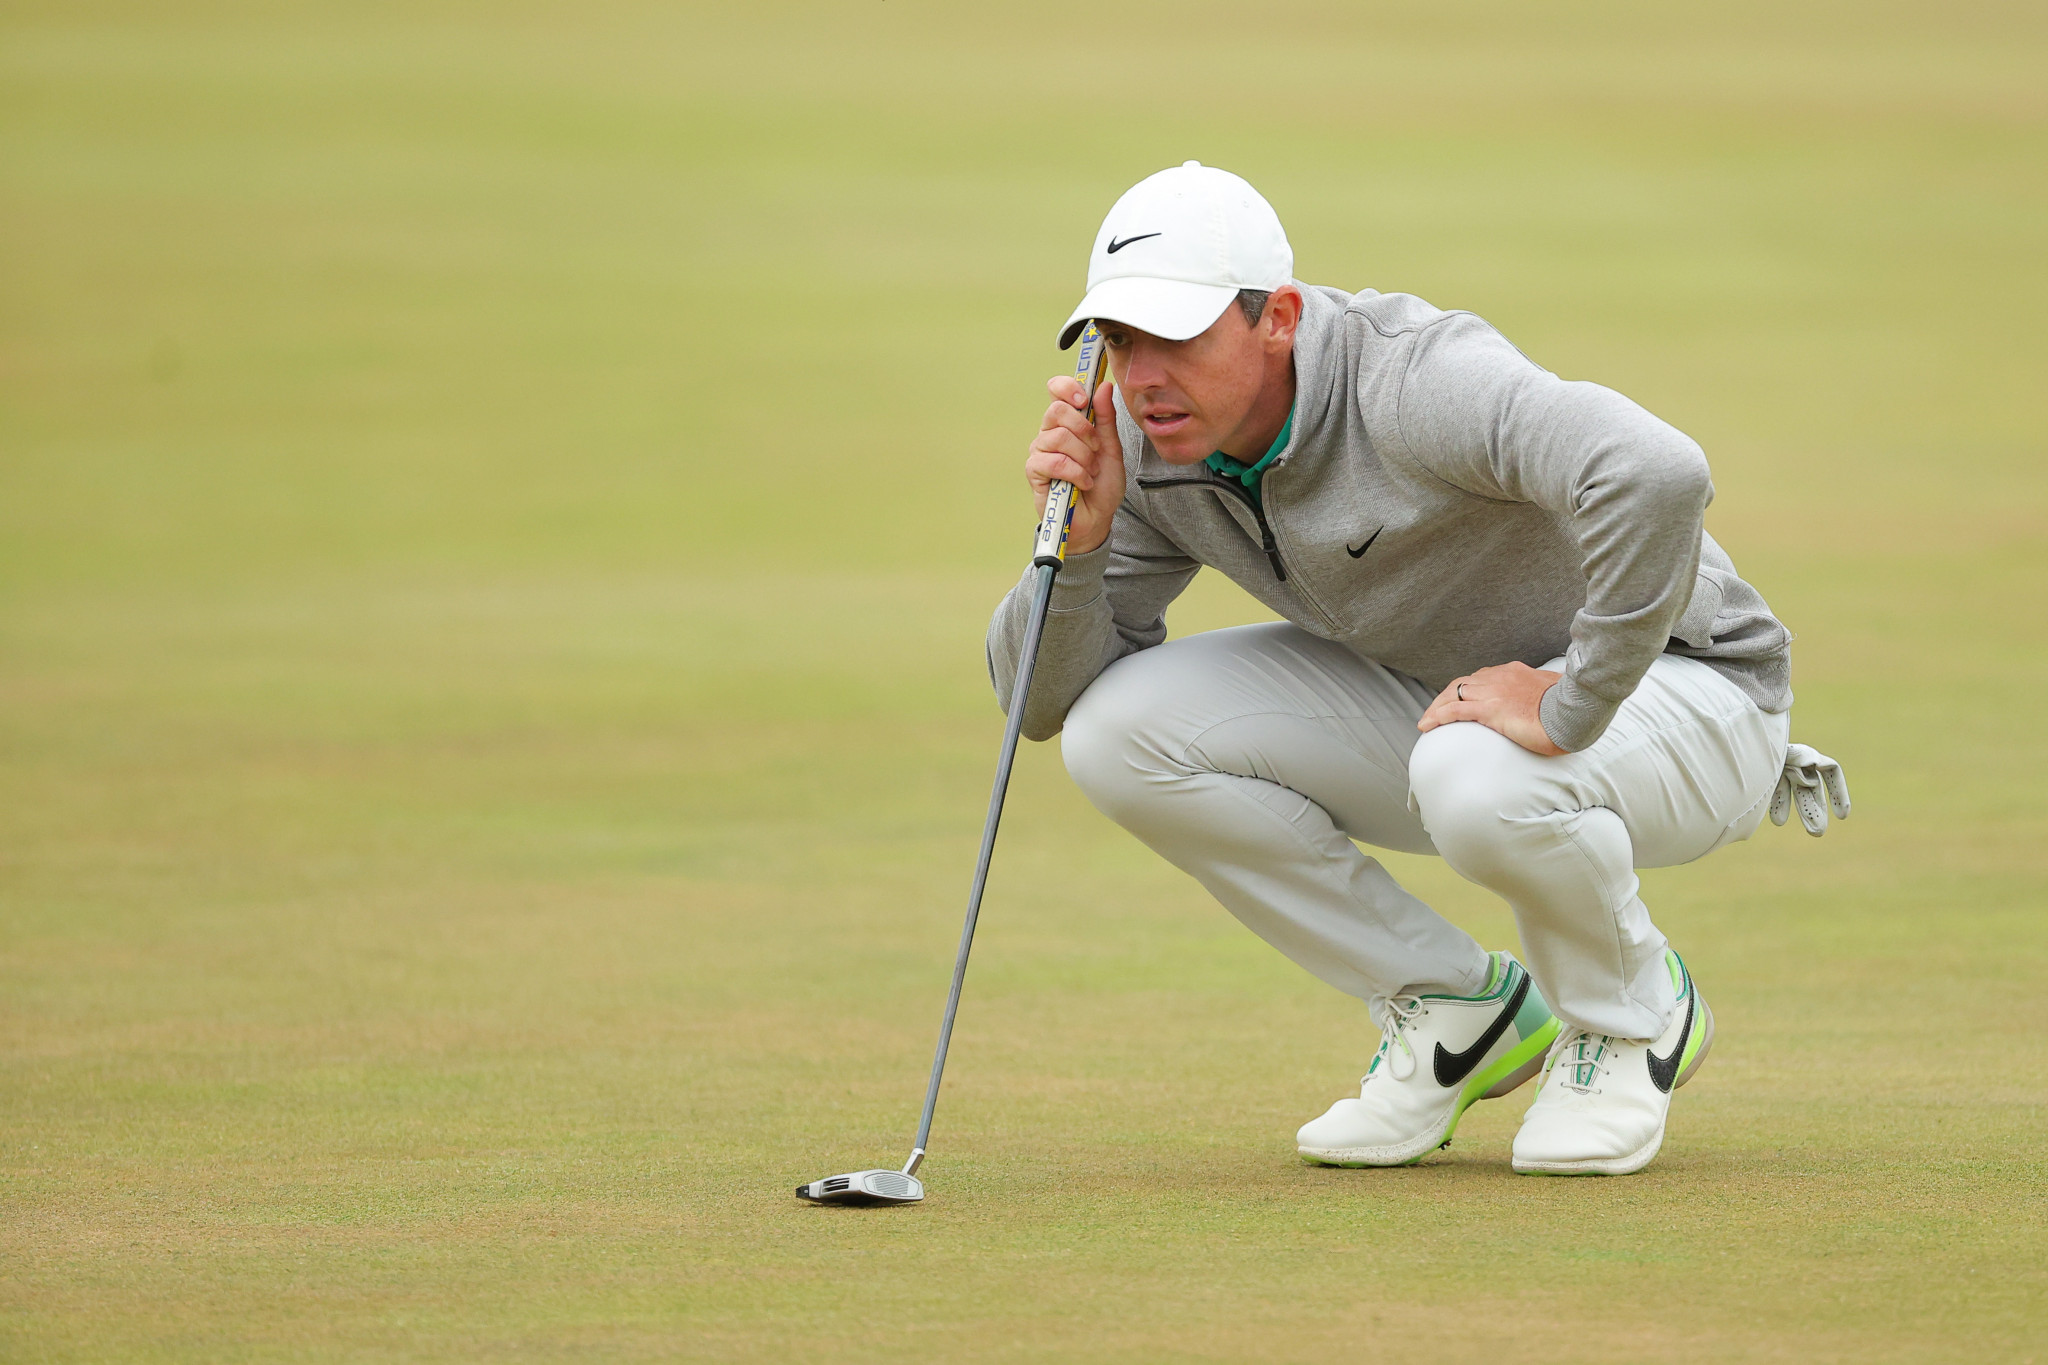 McIlory and Hovland share lead after penultimate day at the Open Championship